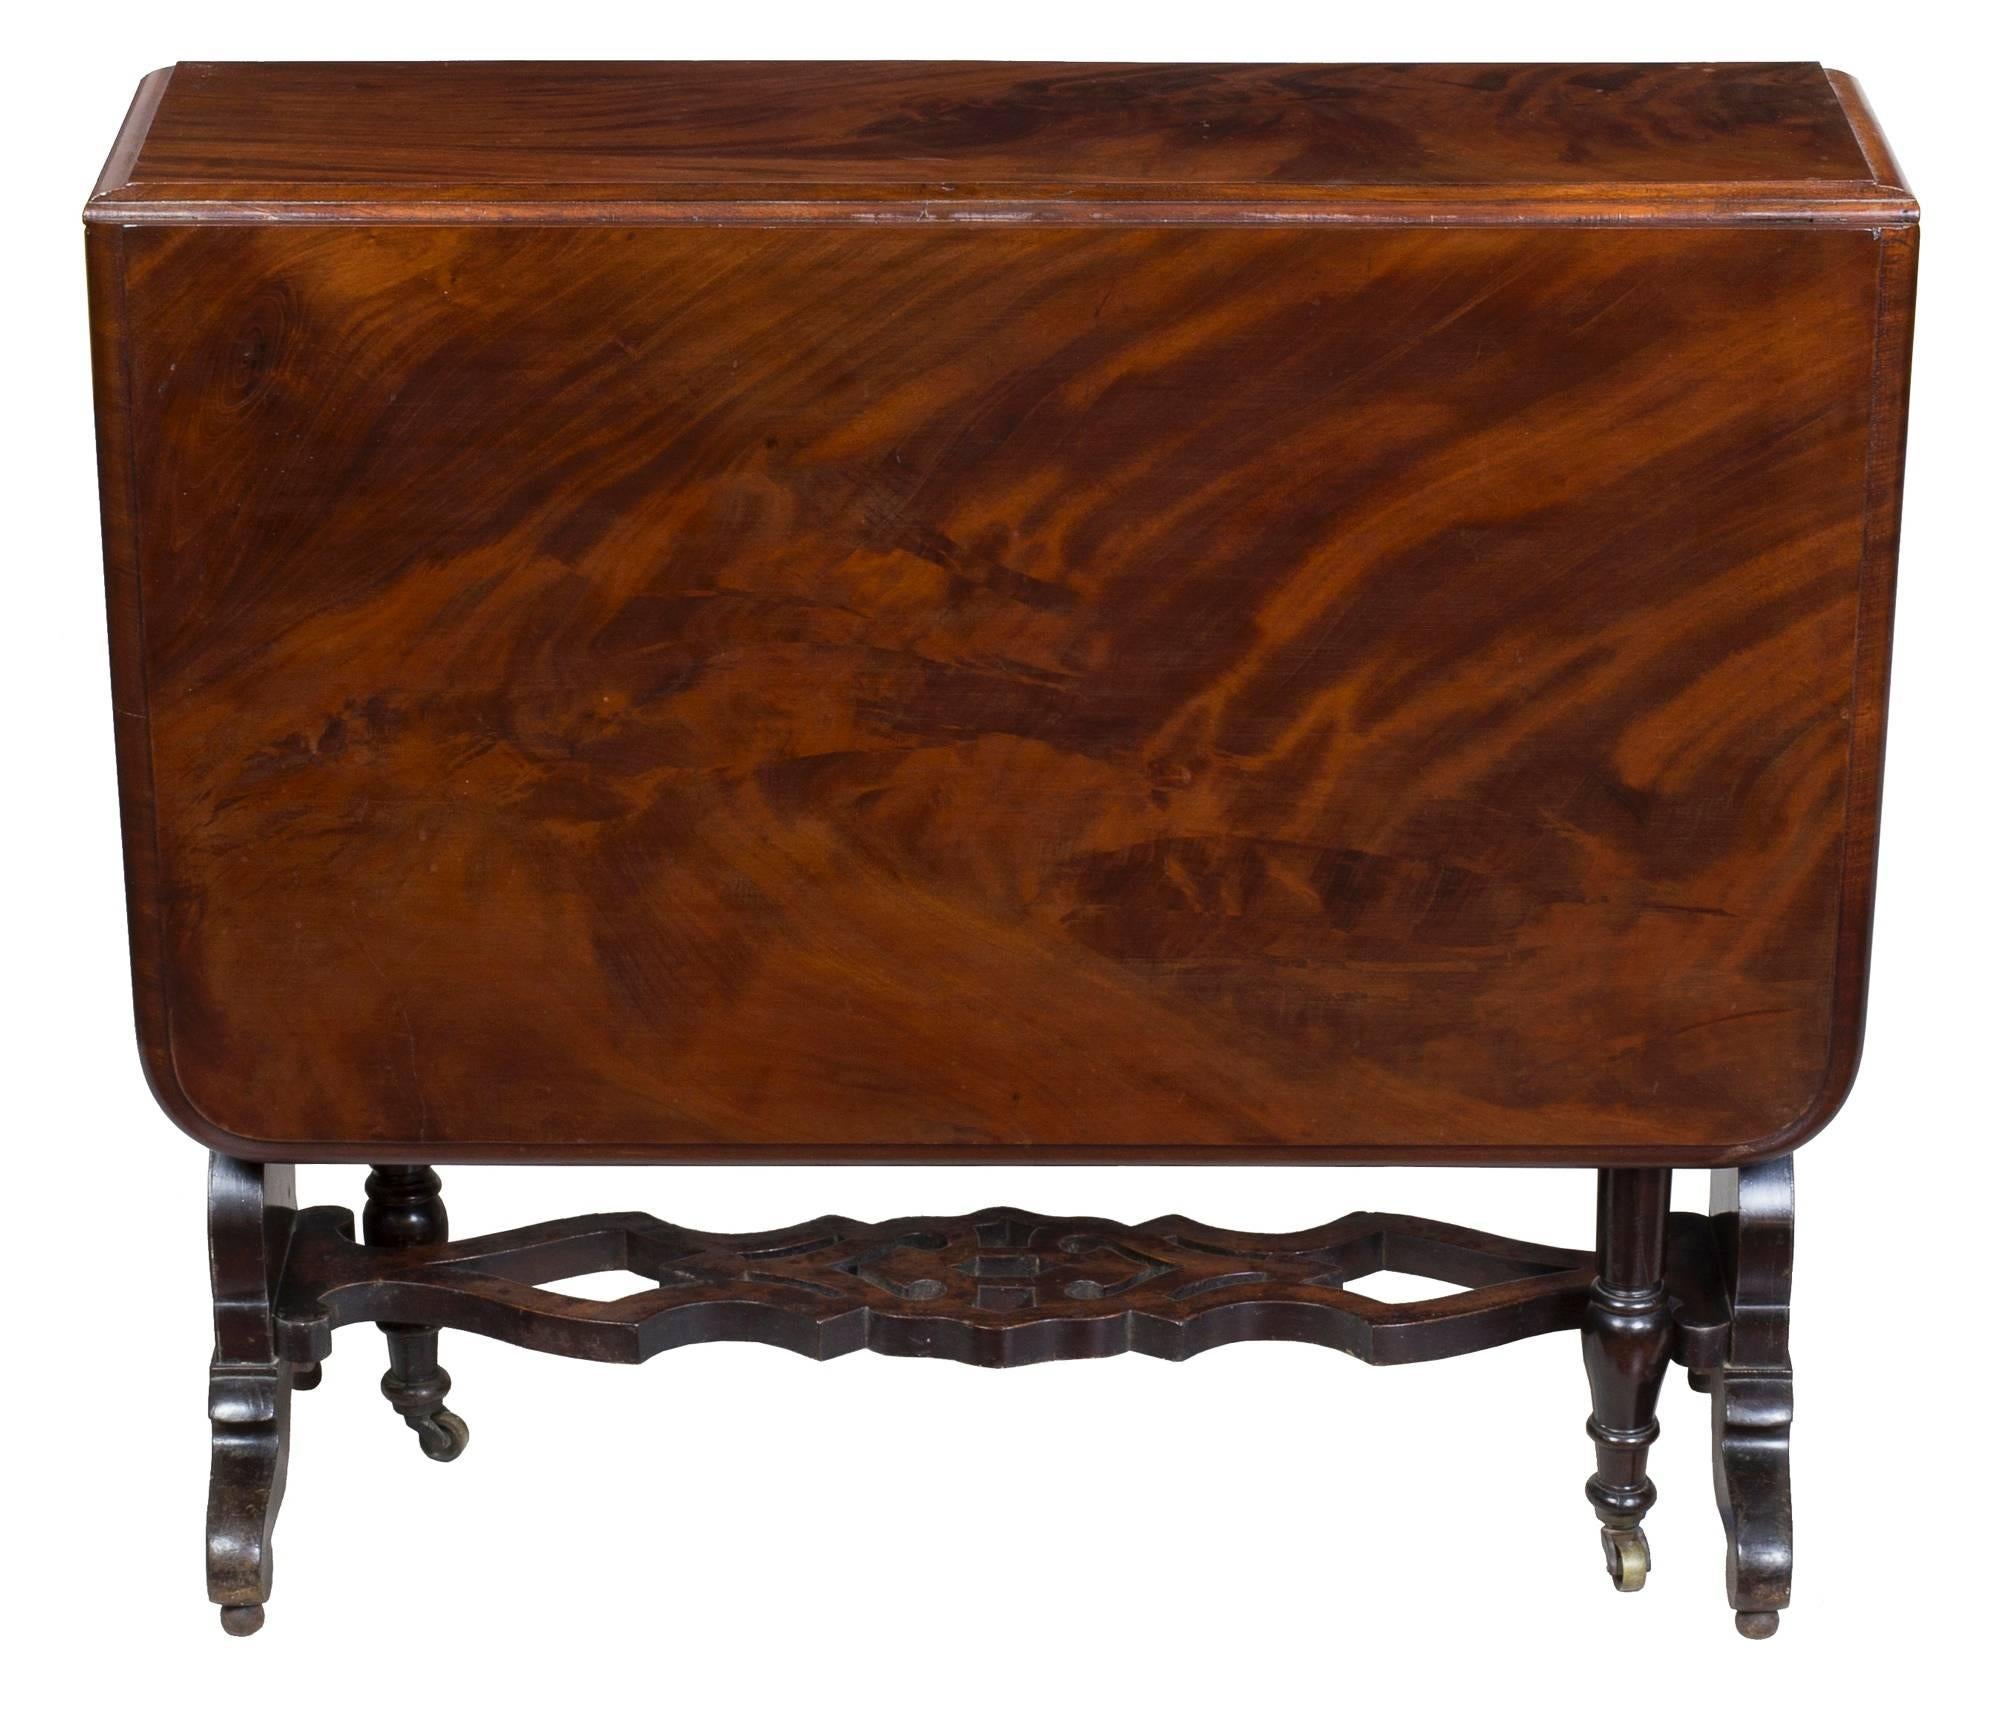 American Classical Fine Desireable Mahogany Sunderland Table, Labeled 